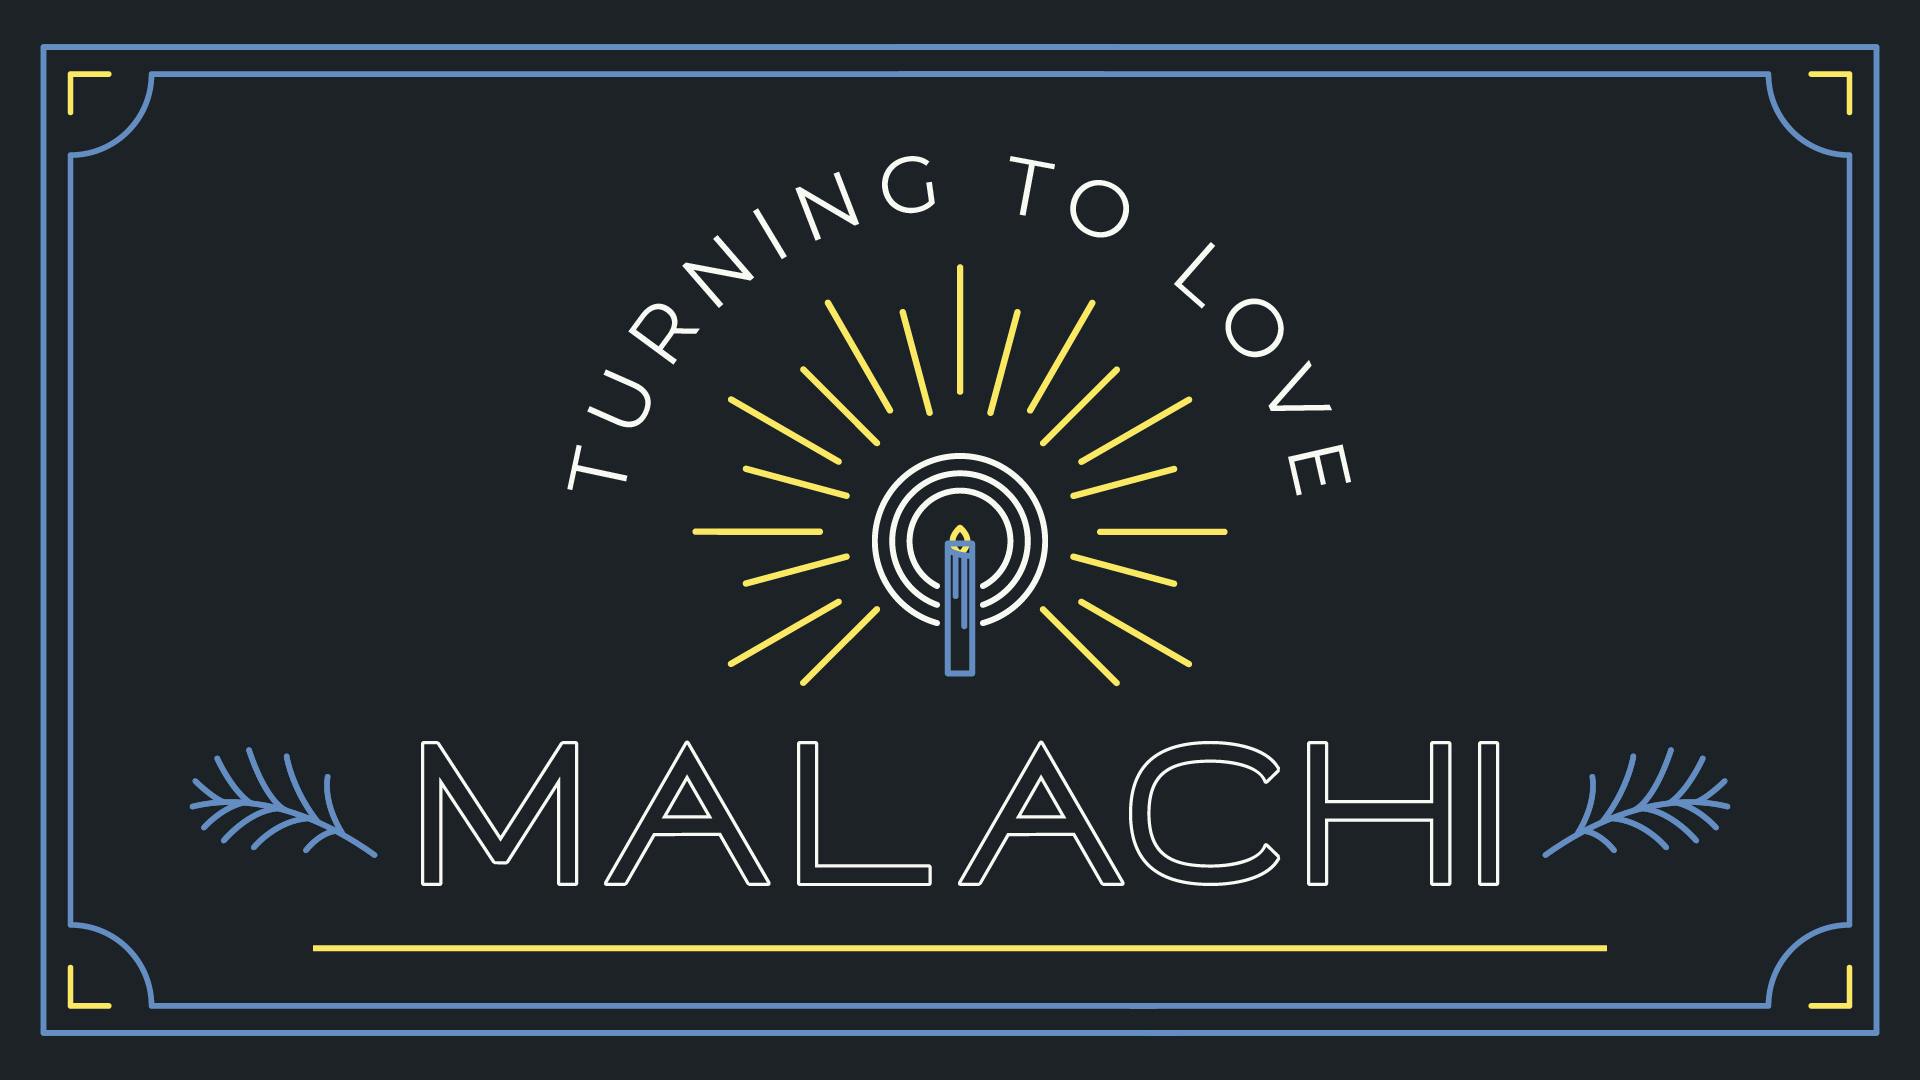 Advent: Malachi - Turning to God cover for post